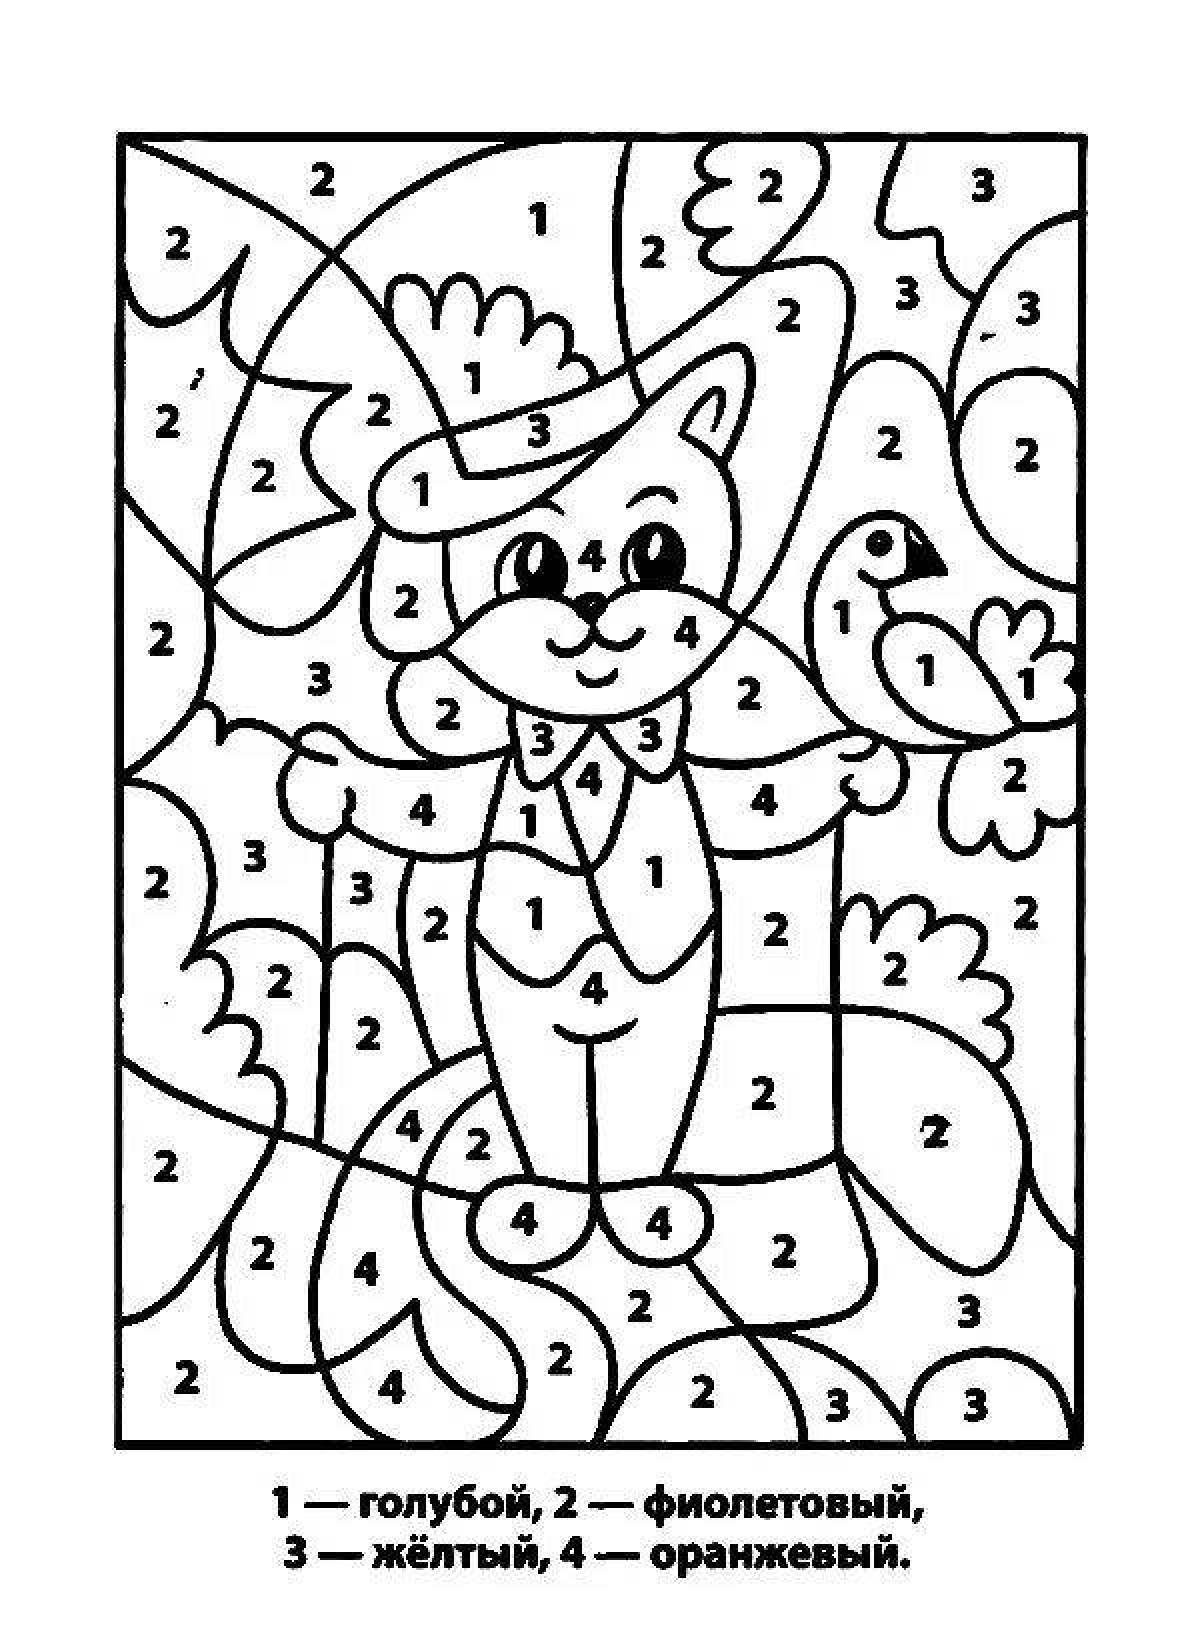 Exciting coloring game with numbers